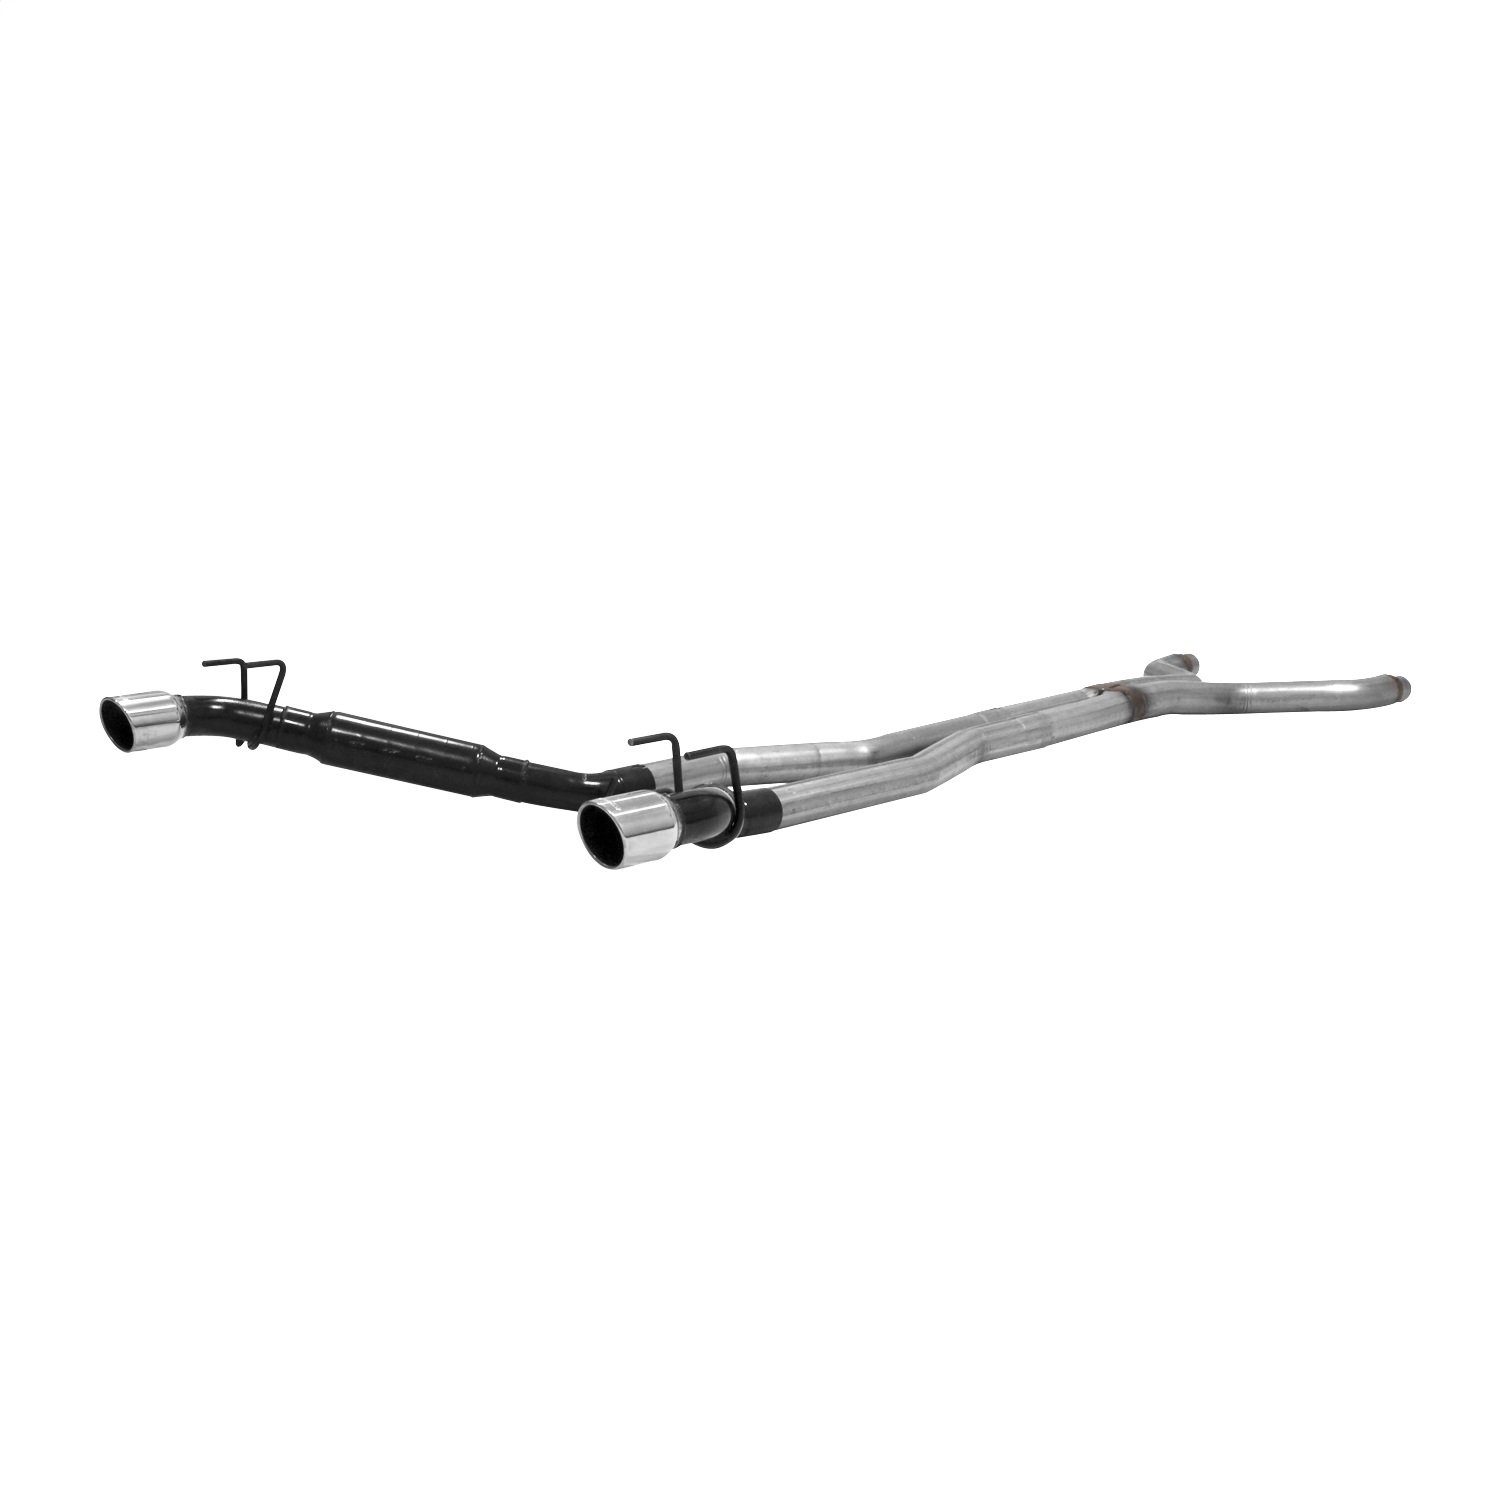 Flowmaster Flowmaster 817556 Outlaw Series Cat Back Exhaust System Fits 10-13 Camaro